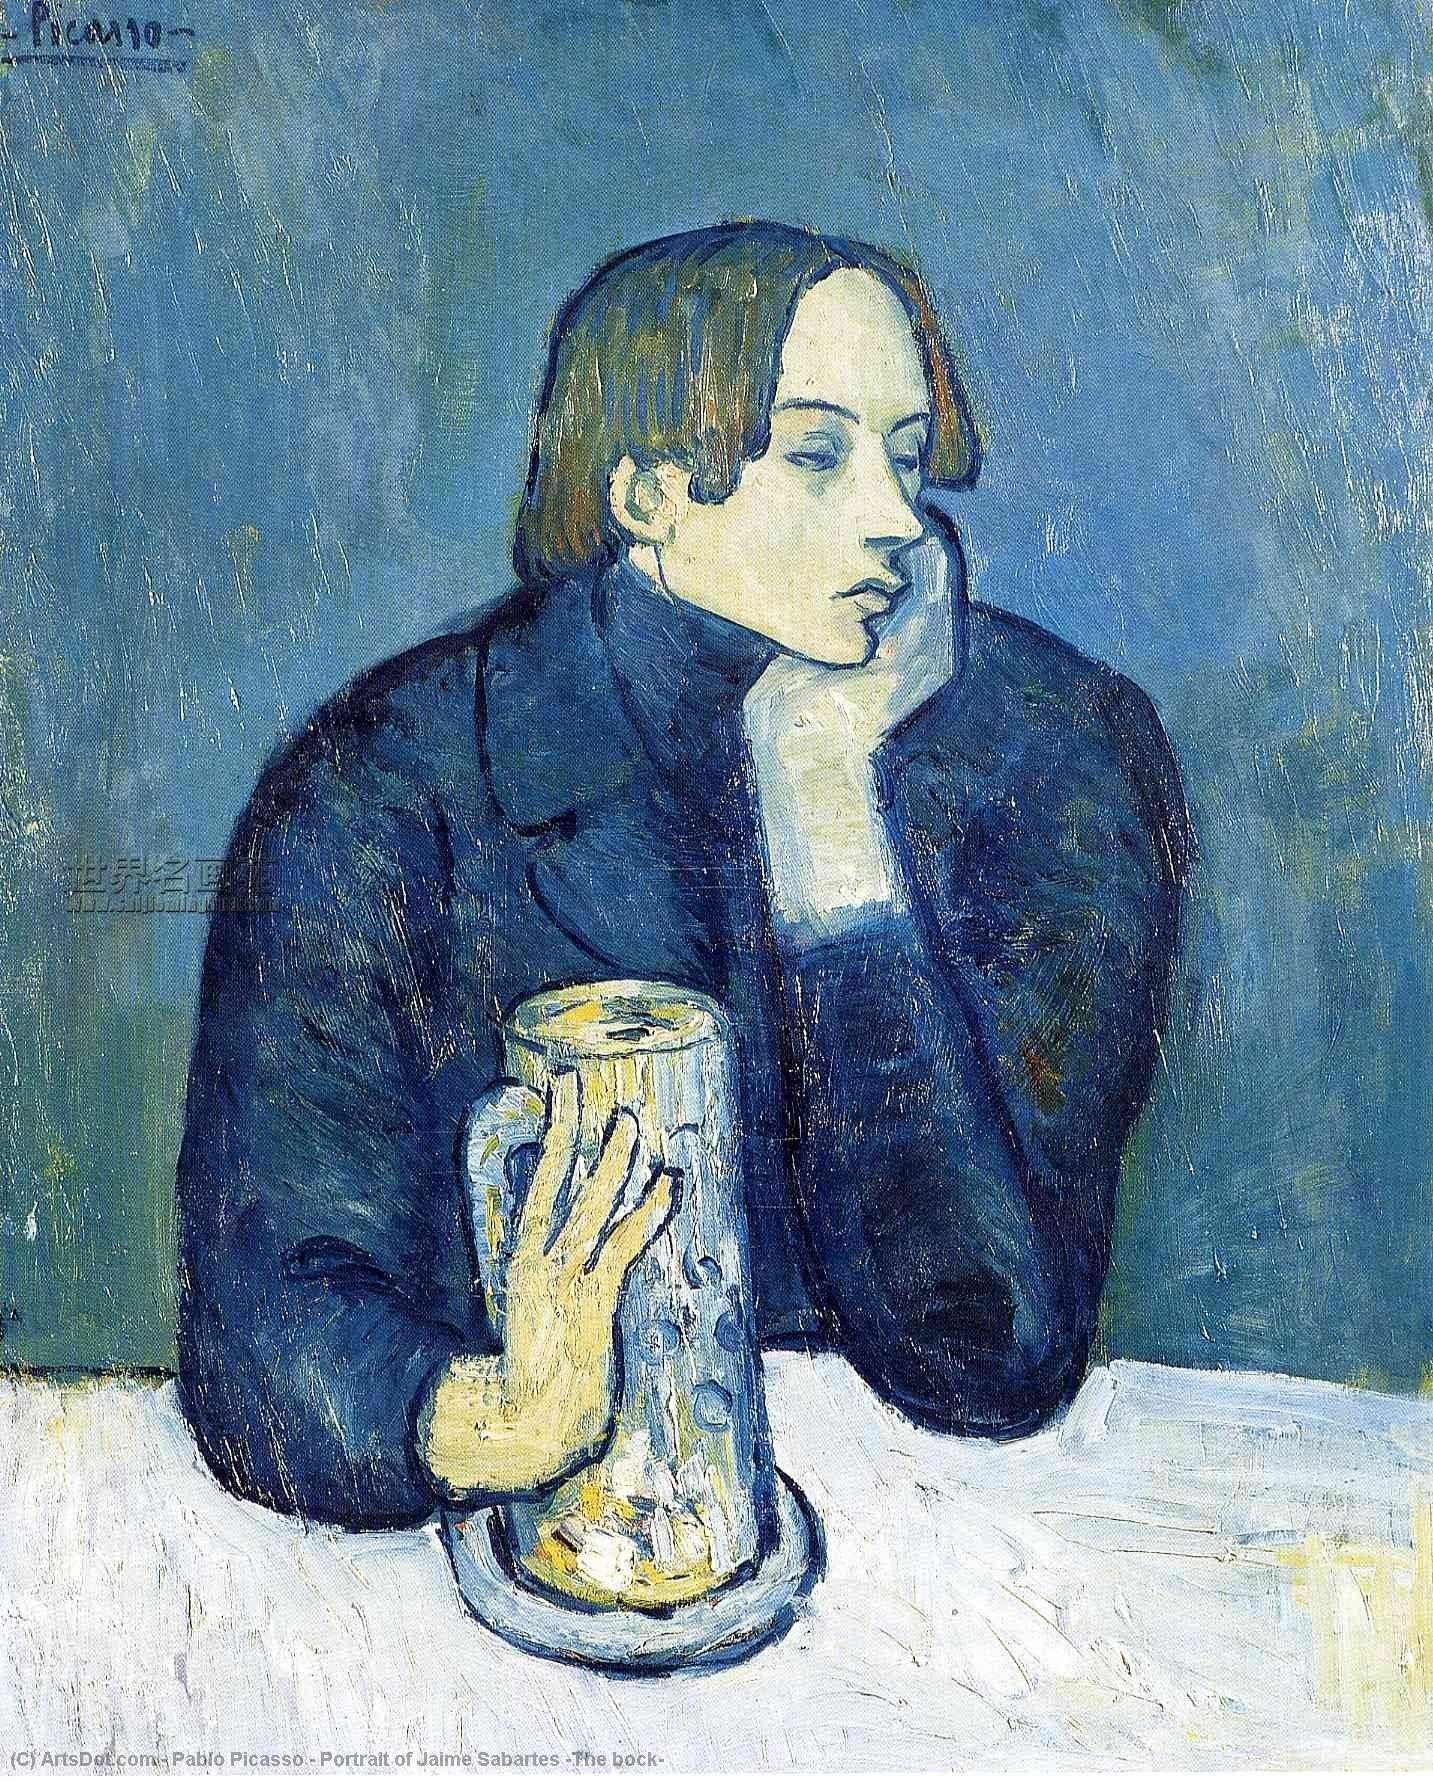 Order Oil Painting Replica Portrait of Jaime Sabartes (The bock), 1901 by Pablo Picasso (Inspired By) (1881-1973, Spain) | ArtsDot.com